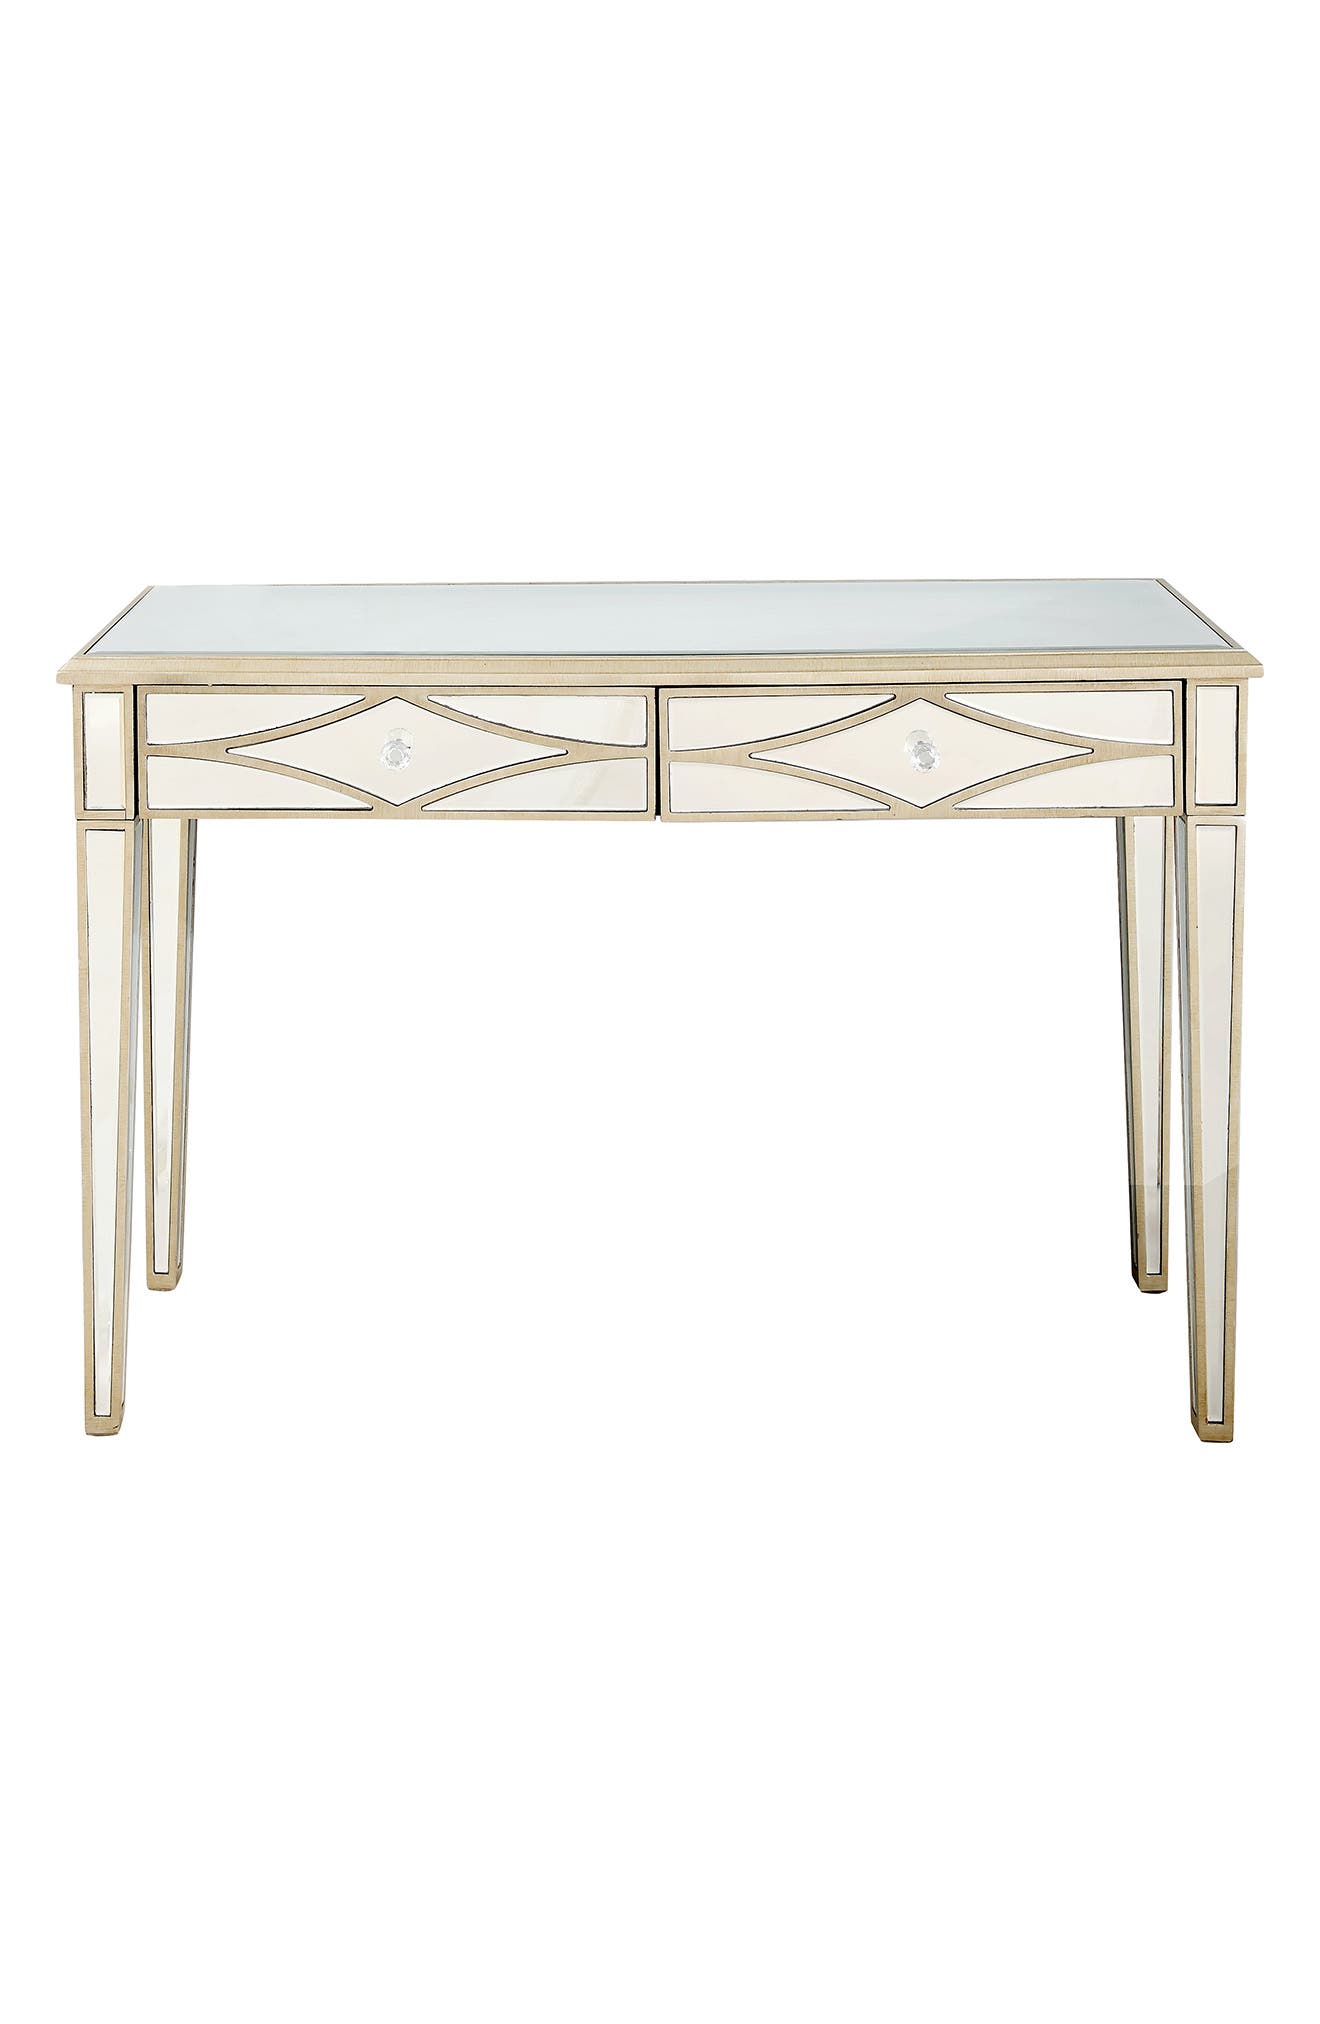 Camden Isle Huxley Console Table In Open Miscellaneous10